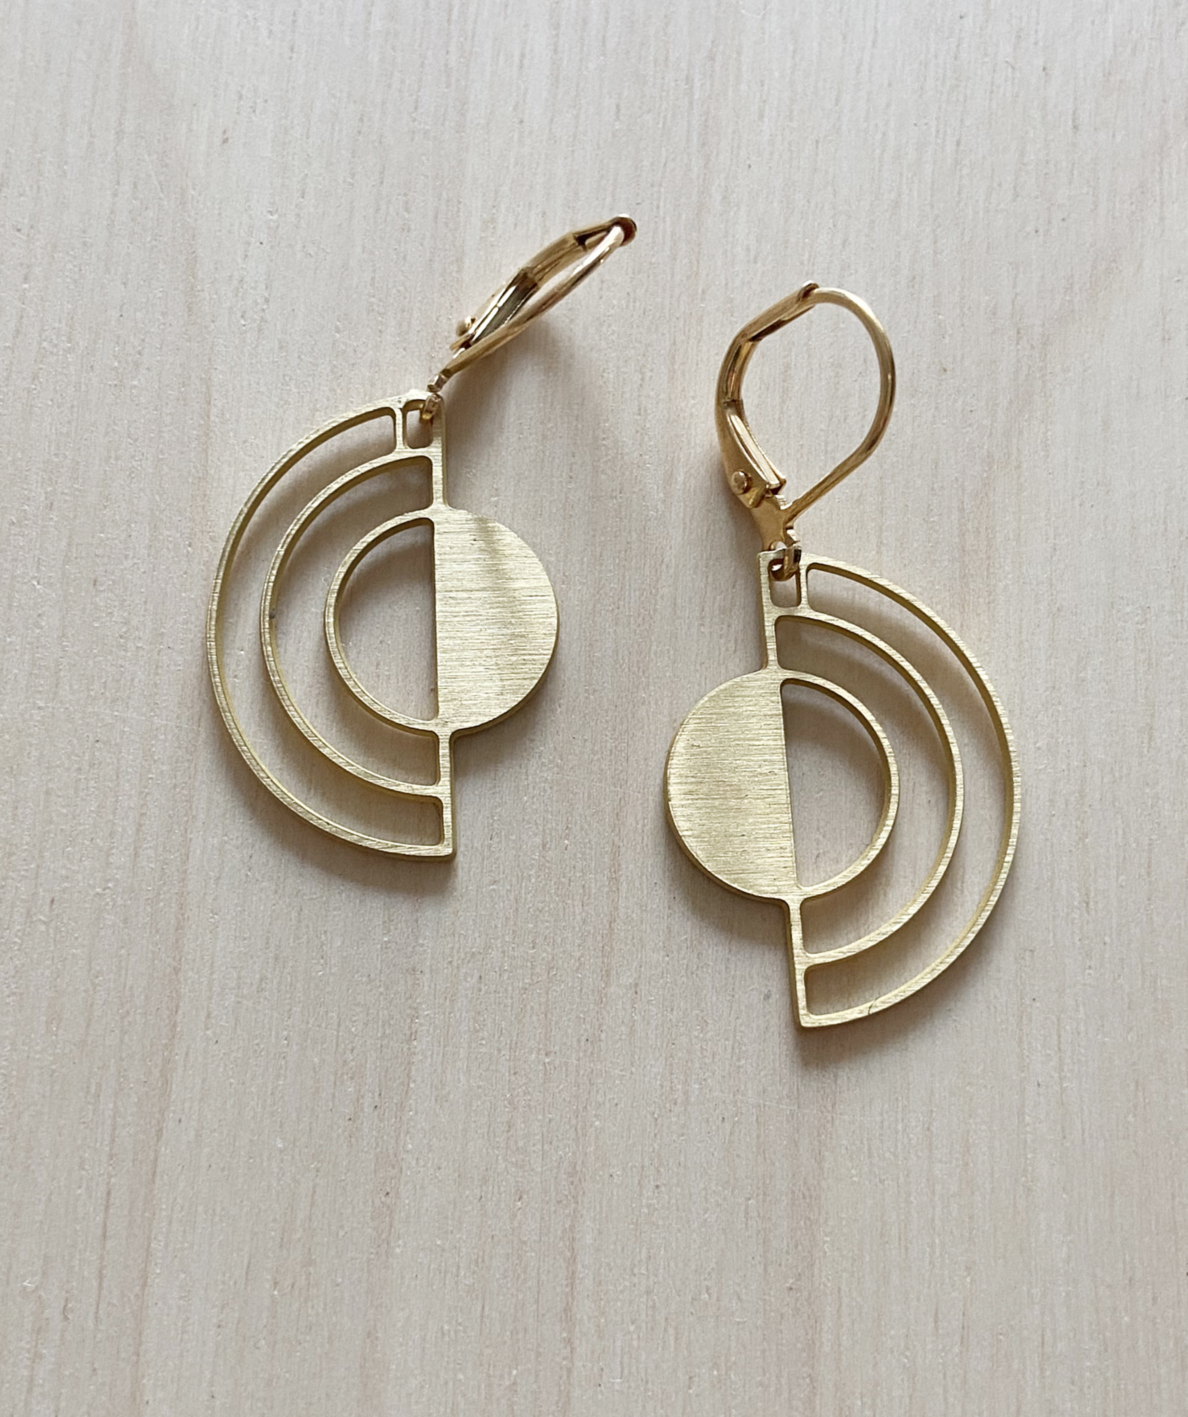 Dowse Sterling Silver Eclipse Earrings